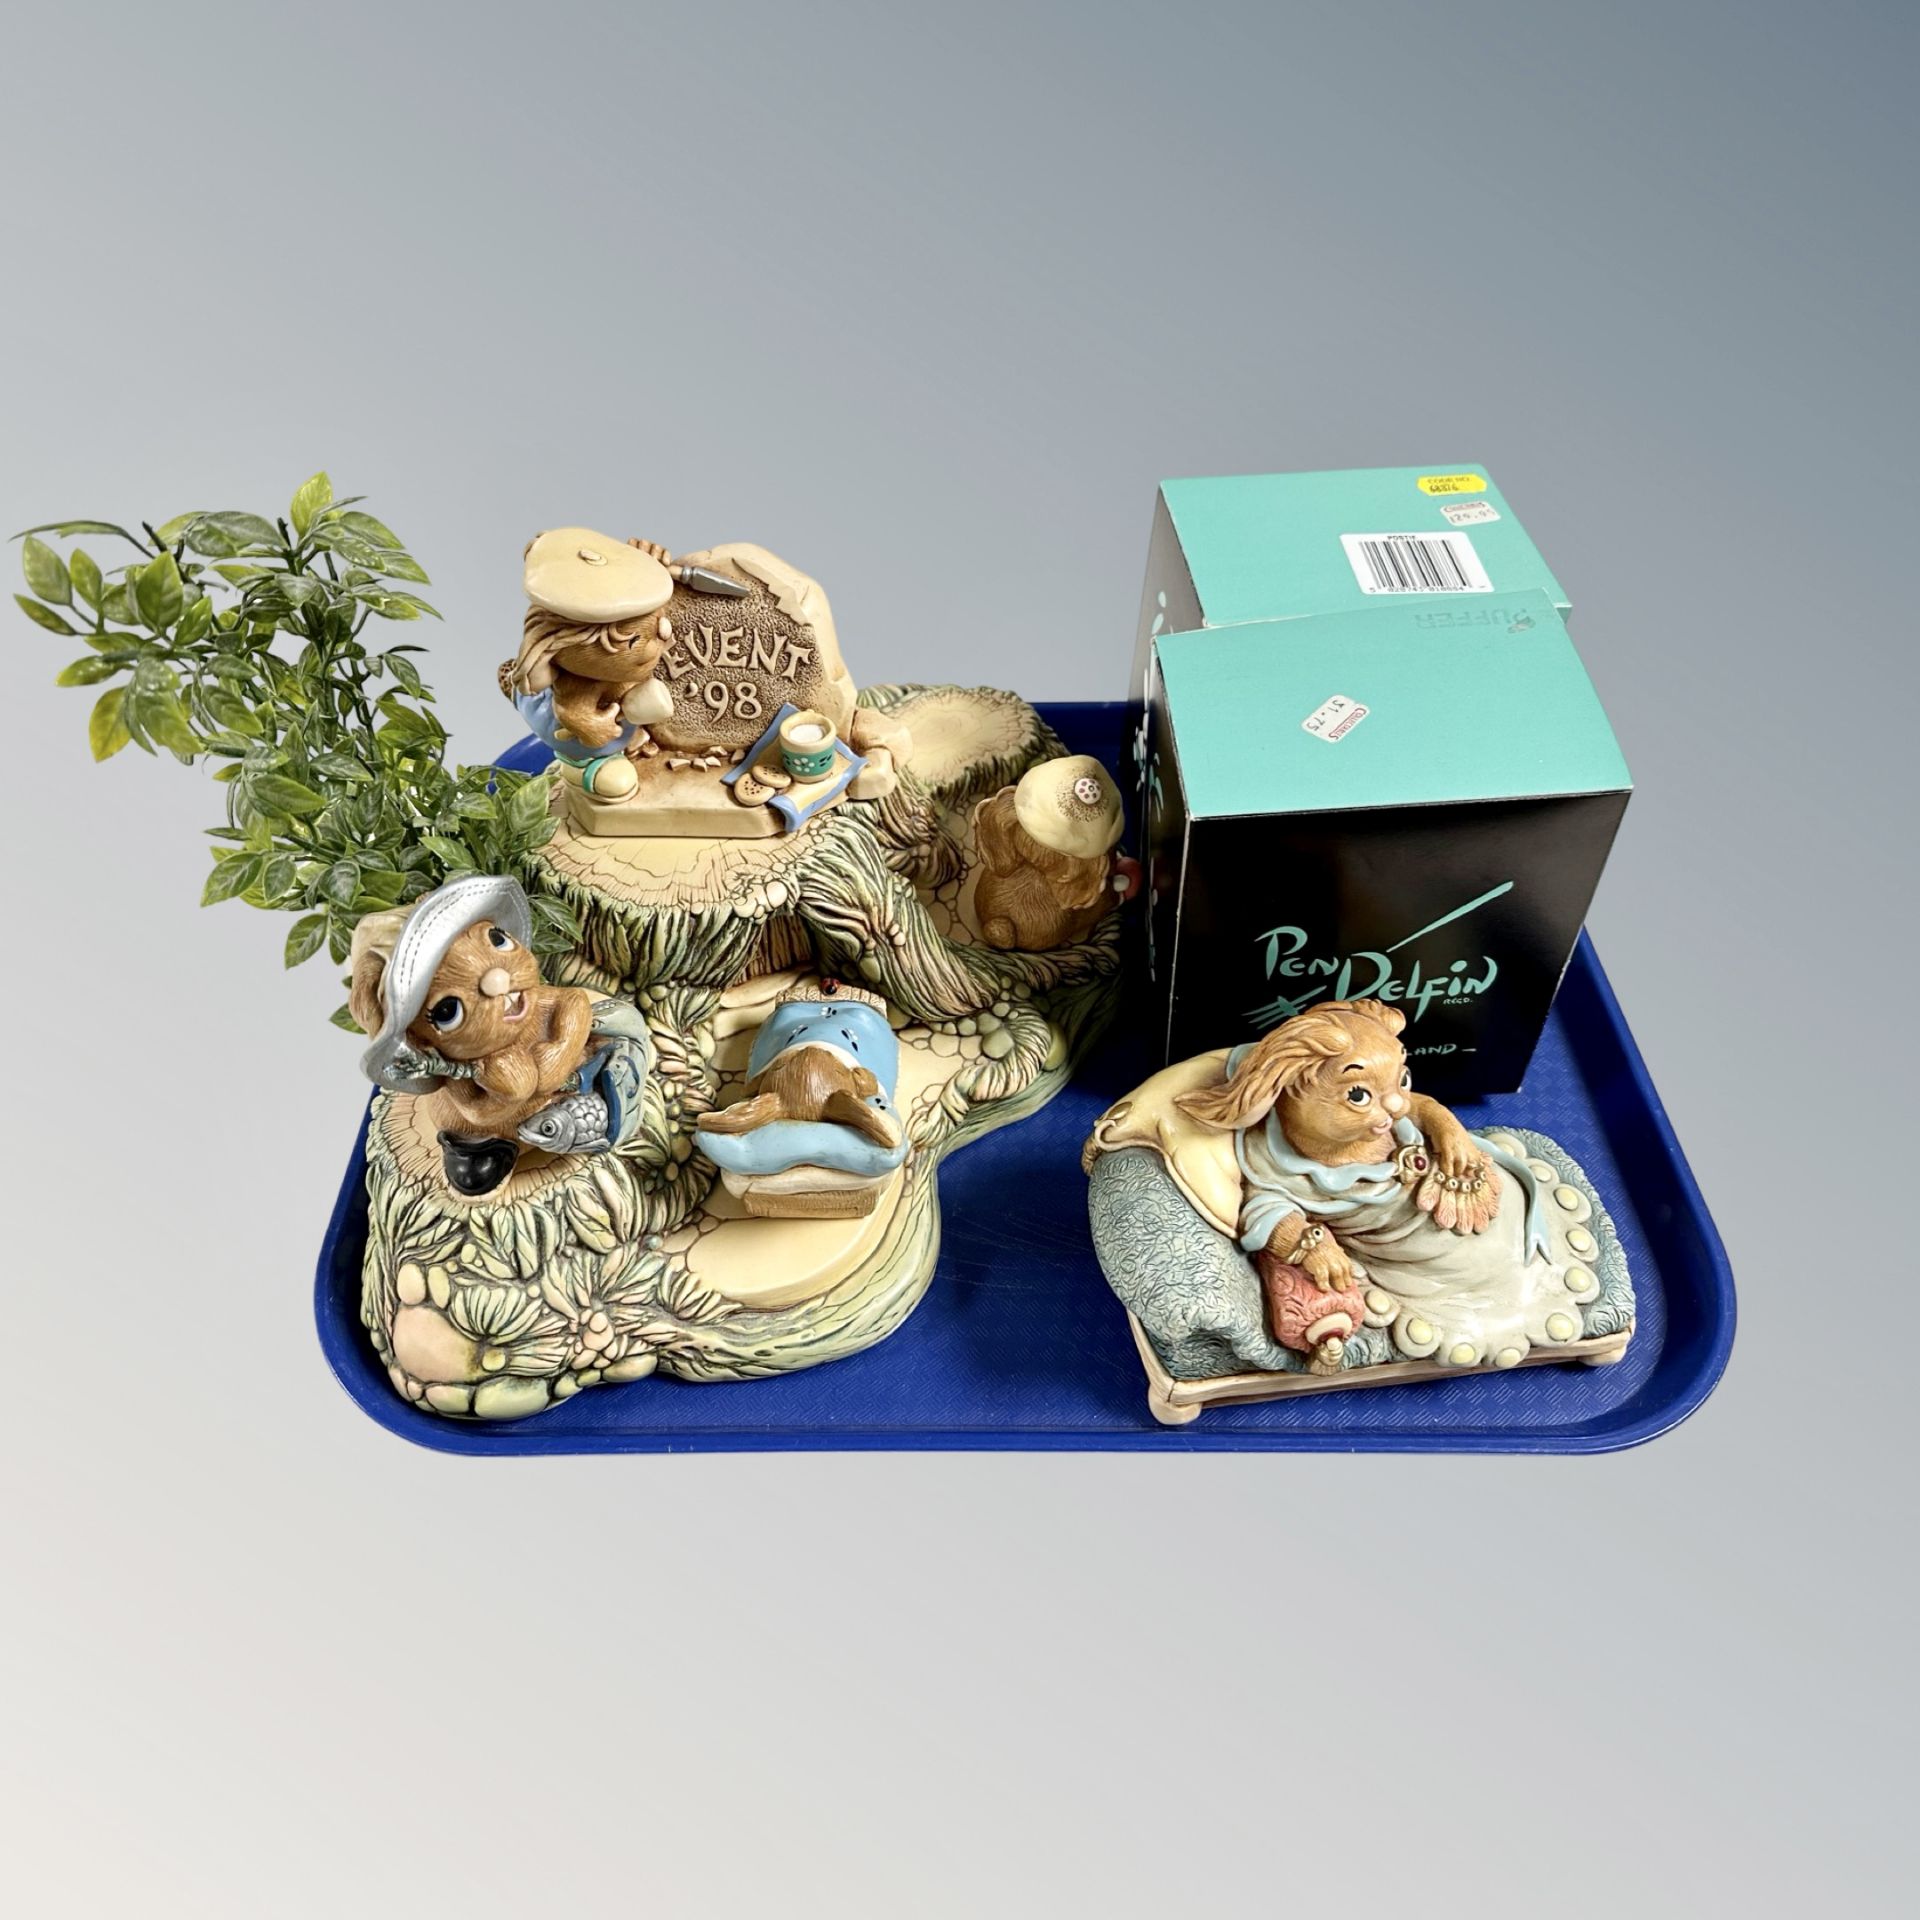 A tray of seven pendelfin figures - Duchess, Event 98, Posty, Wakey (2 boxed),